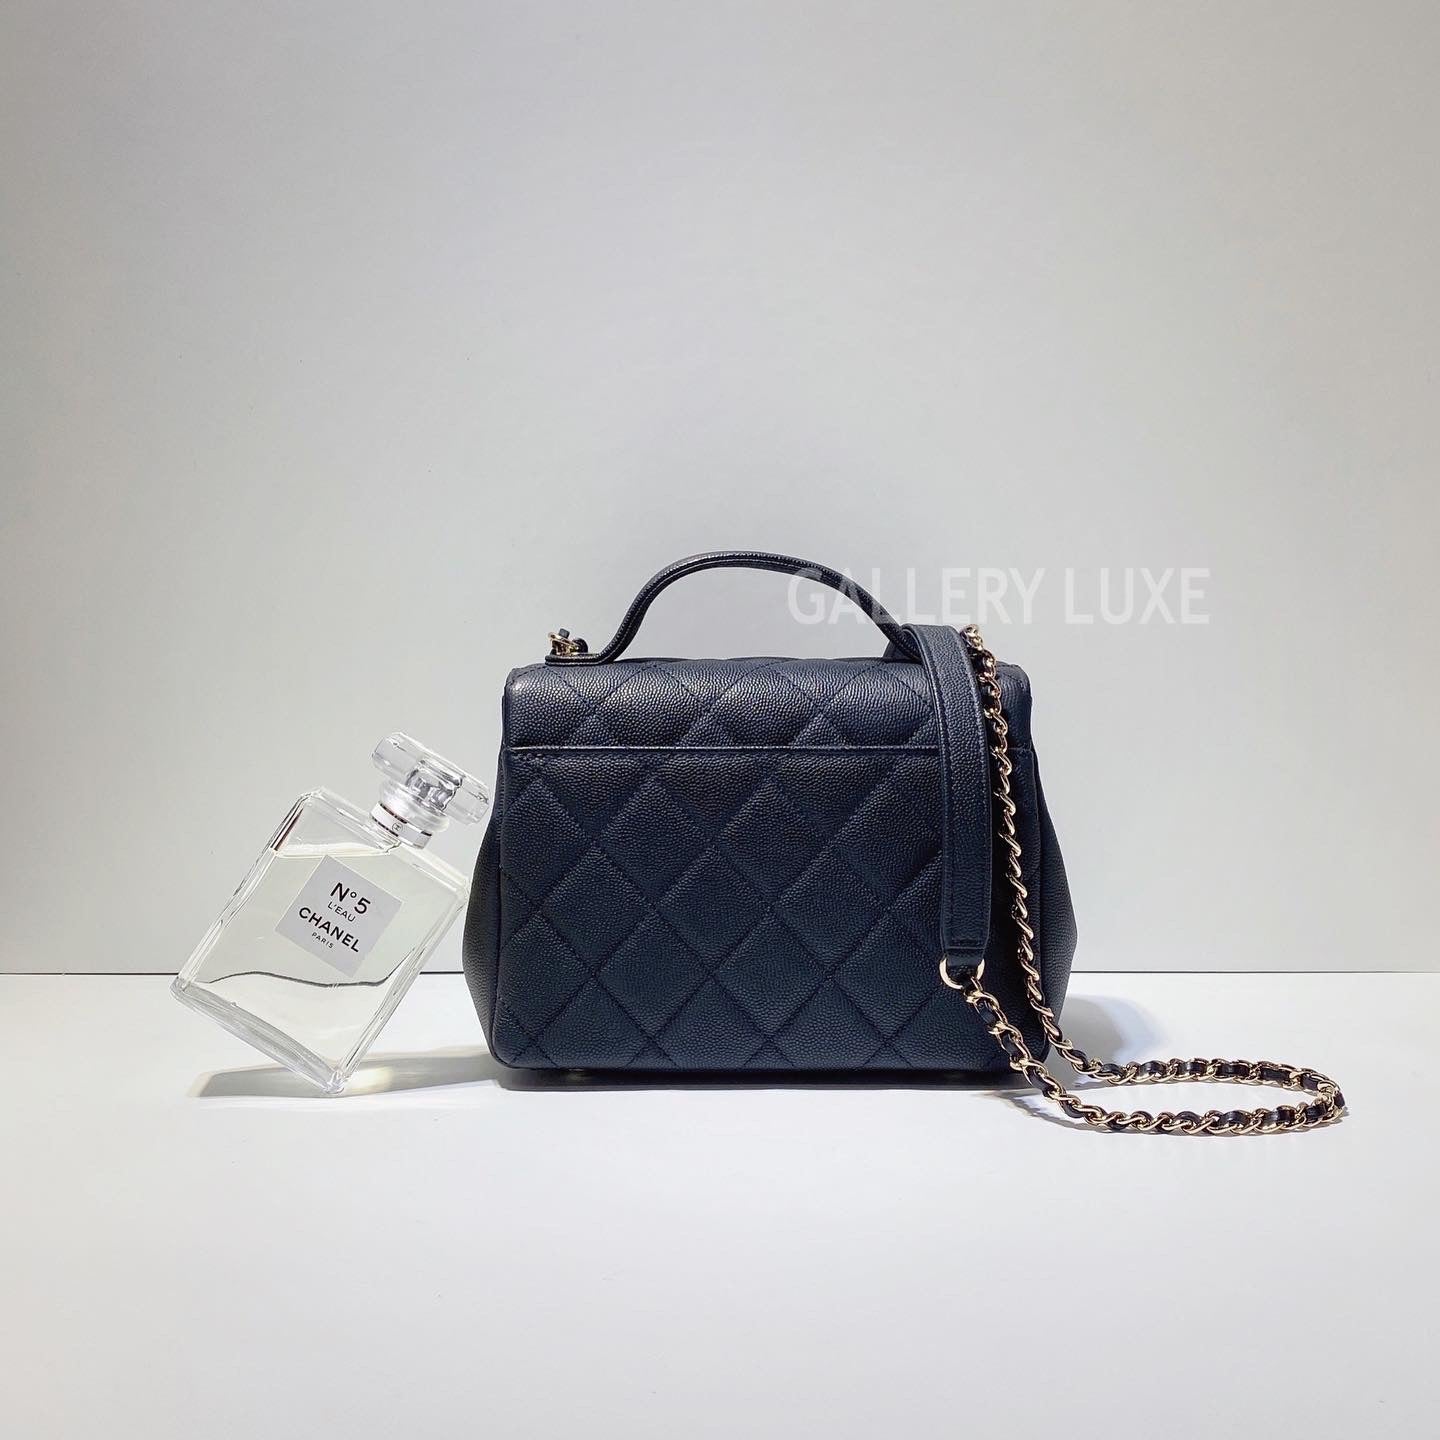 No.3314-Chanel Small Business Affinity Flap Bag – Gallery Luxe